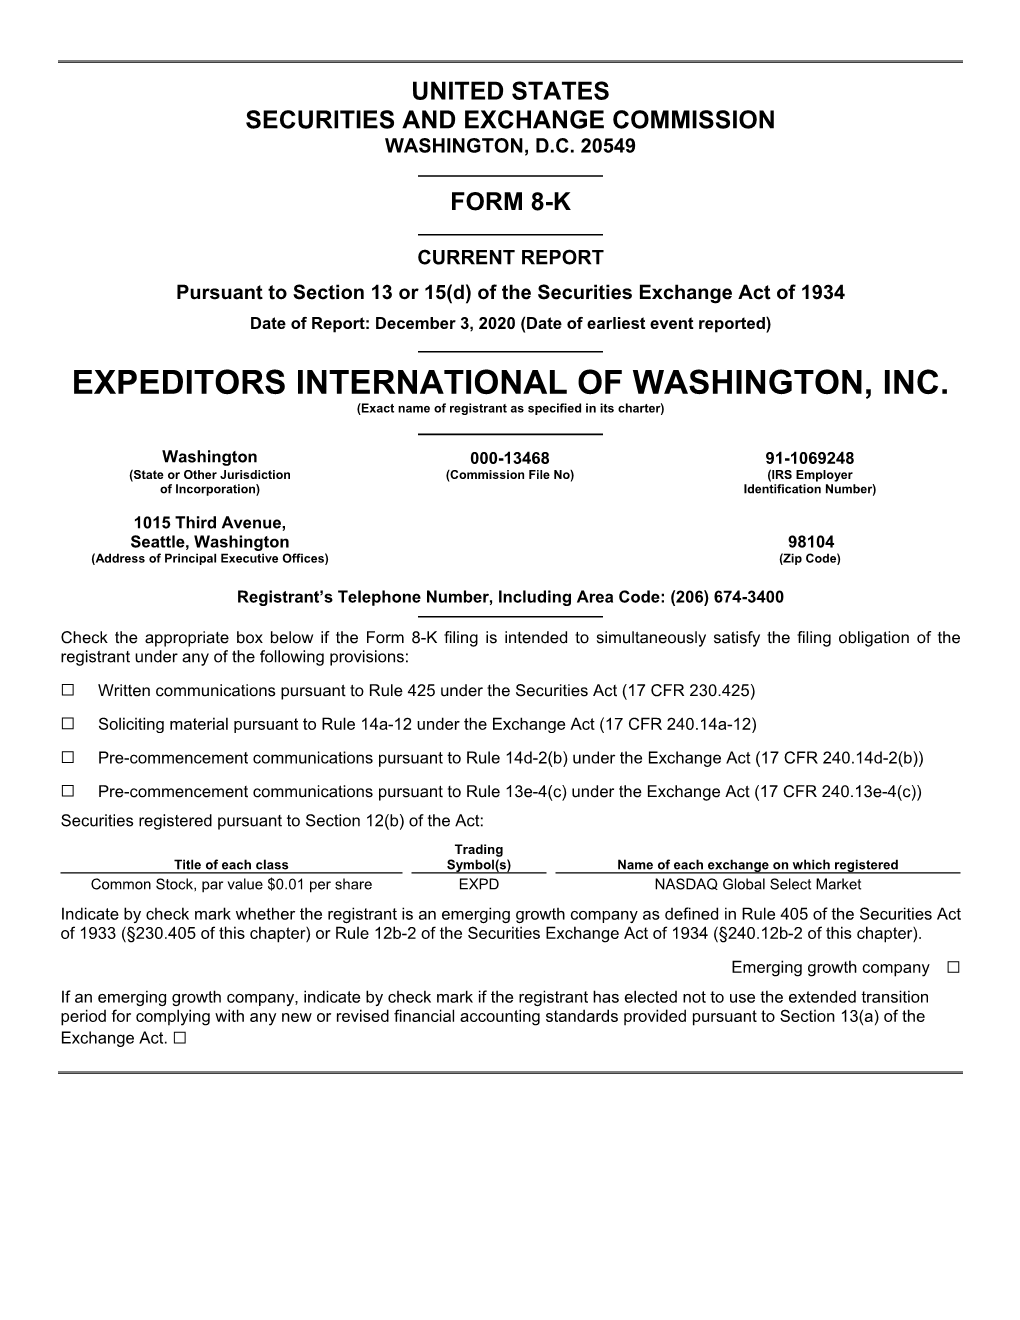 EXPEDITORS INTERNATIONAL of WASHINGTON, INC. (Exact Name of Registrant As Specified in Its Charter)